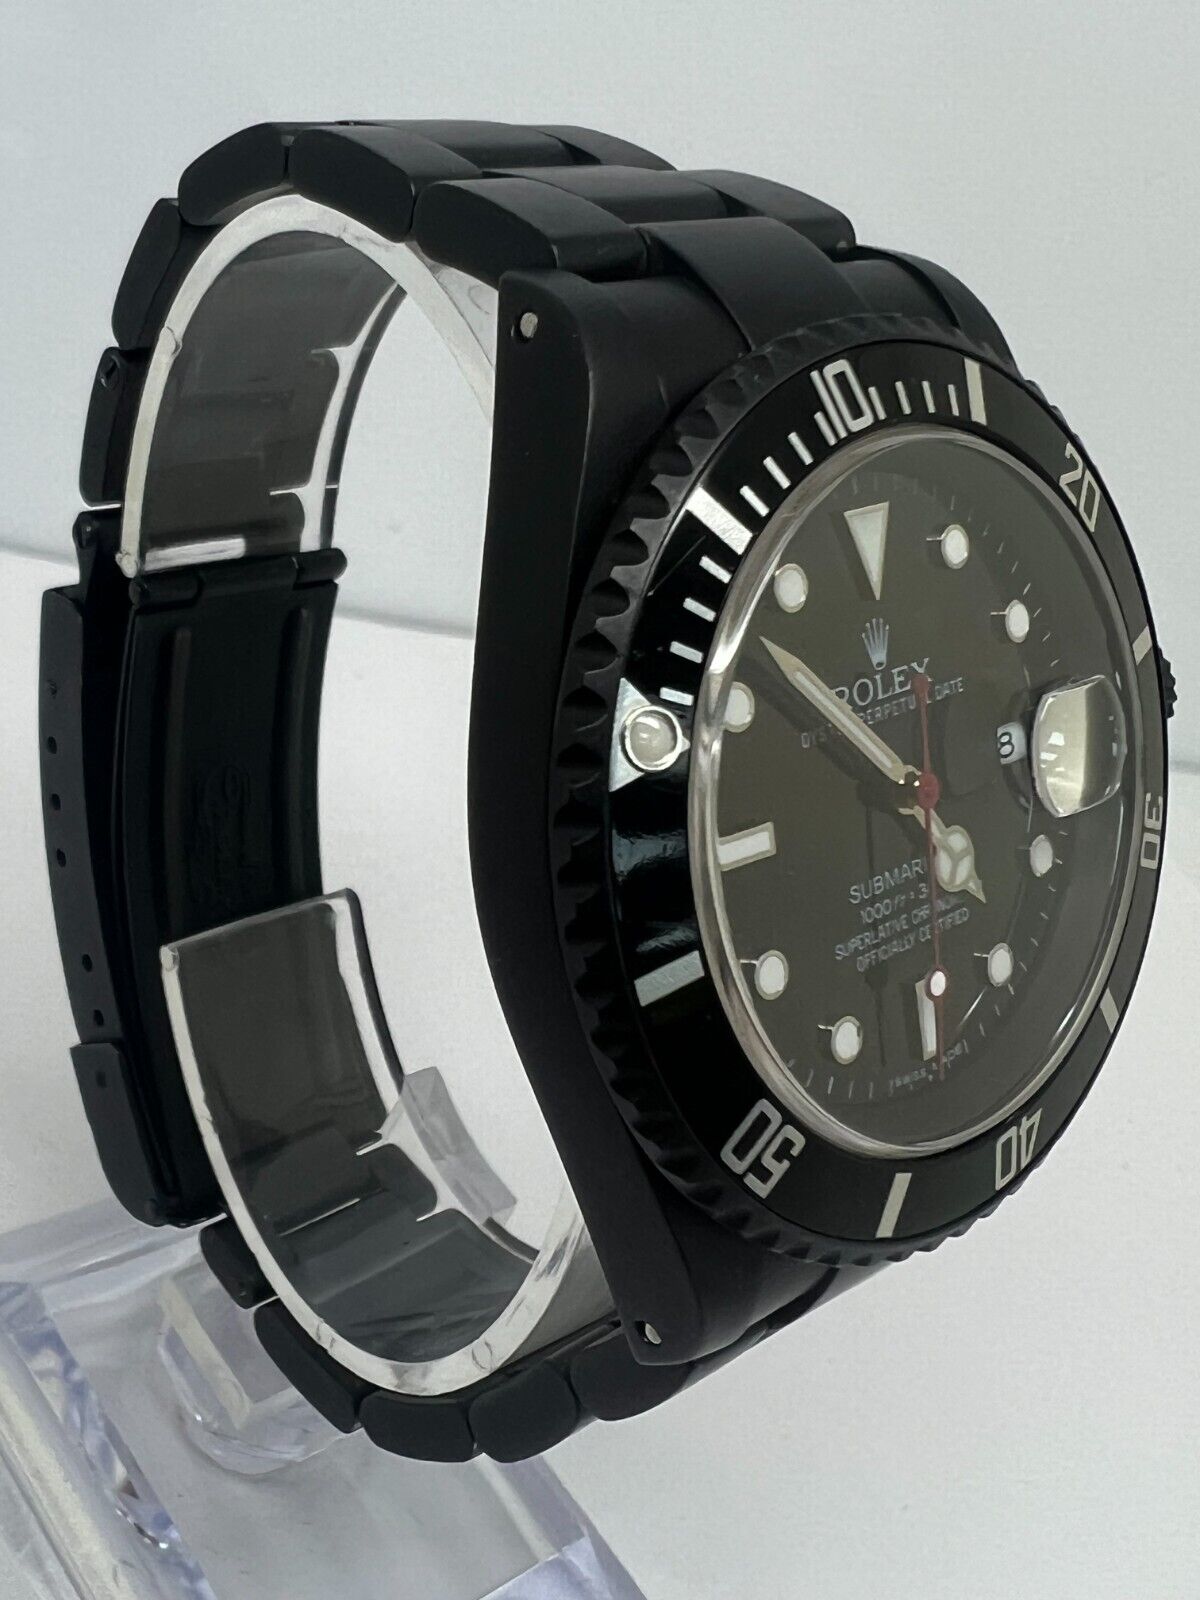 Rolex Submariner 16610 Carbon Blacked Out Watch